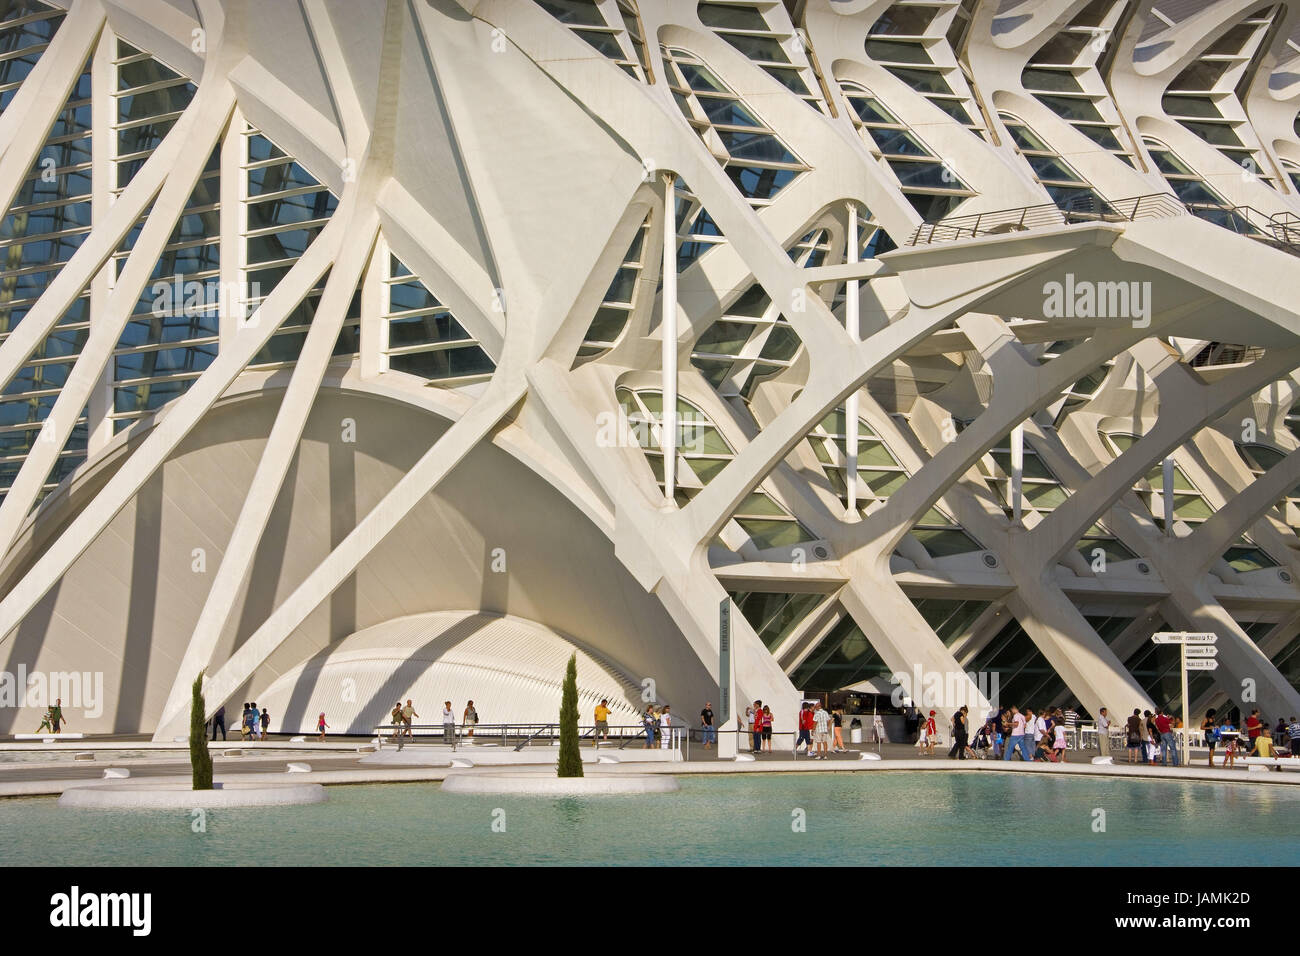 Spain,Valencia,Science centre,'town of the arts and the sciences',Europe,Catalonia,town,building,museum,steel design work,science museum,event centre,exhibit centre,structure,architecture,modern,water,water cymbal,visitor,passer-by,outside, Stock Photo